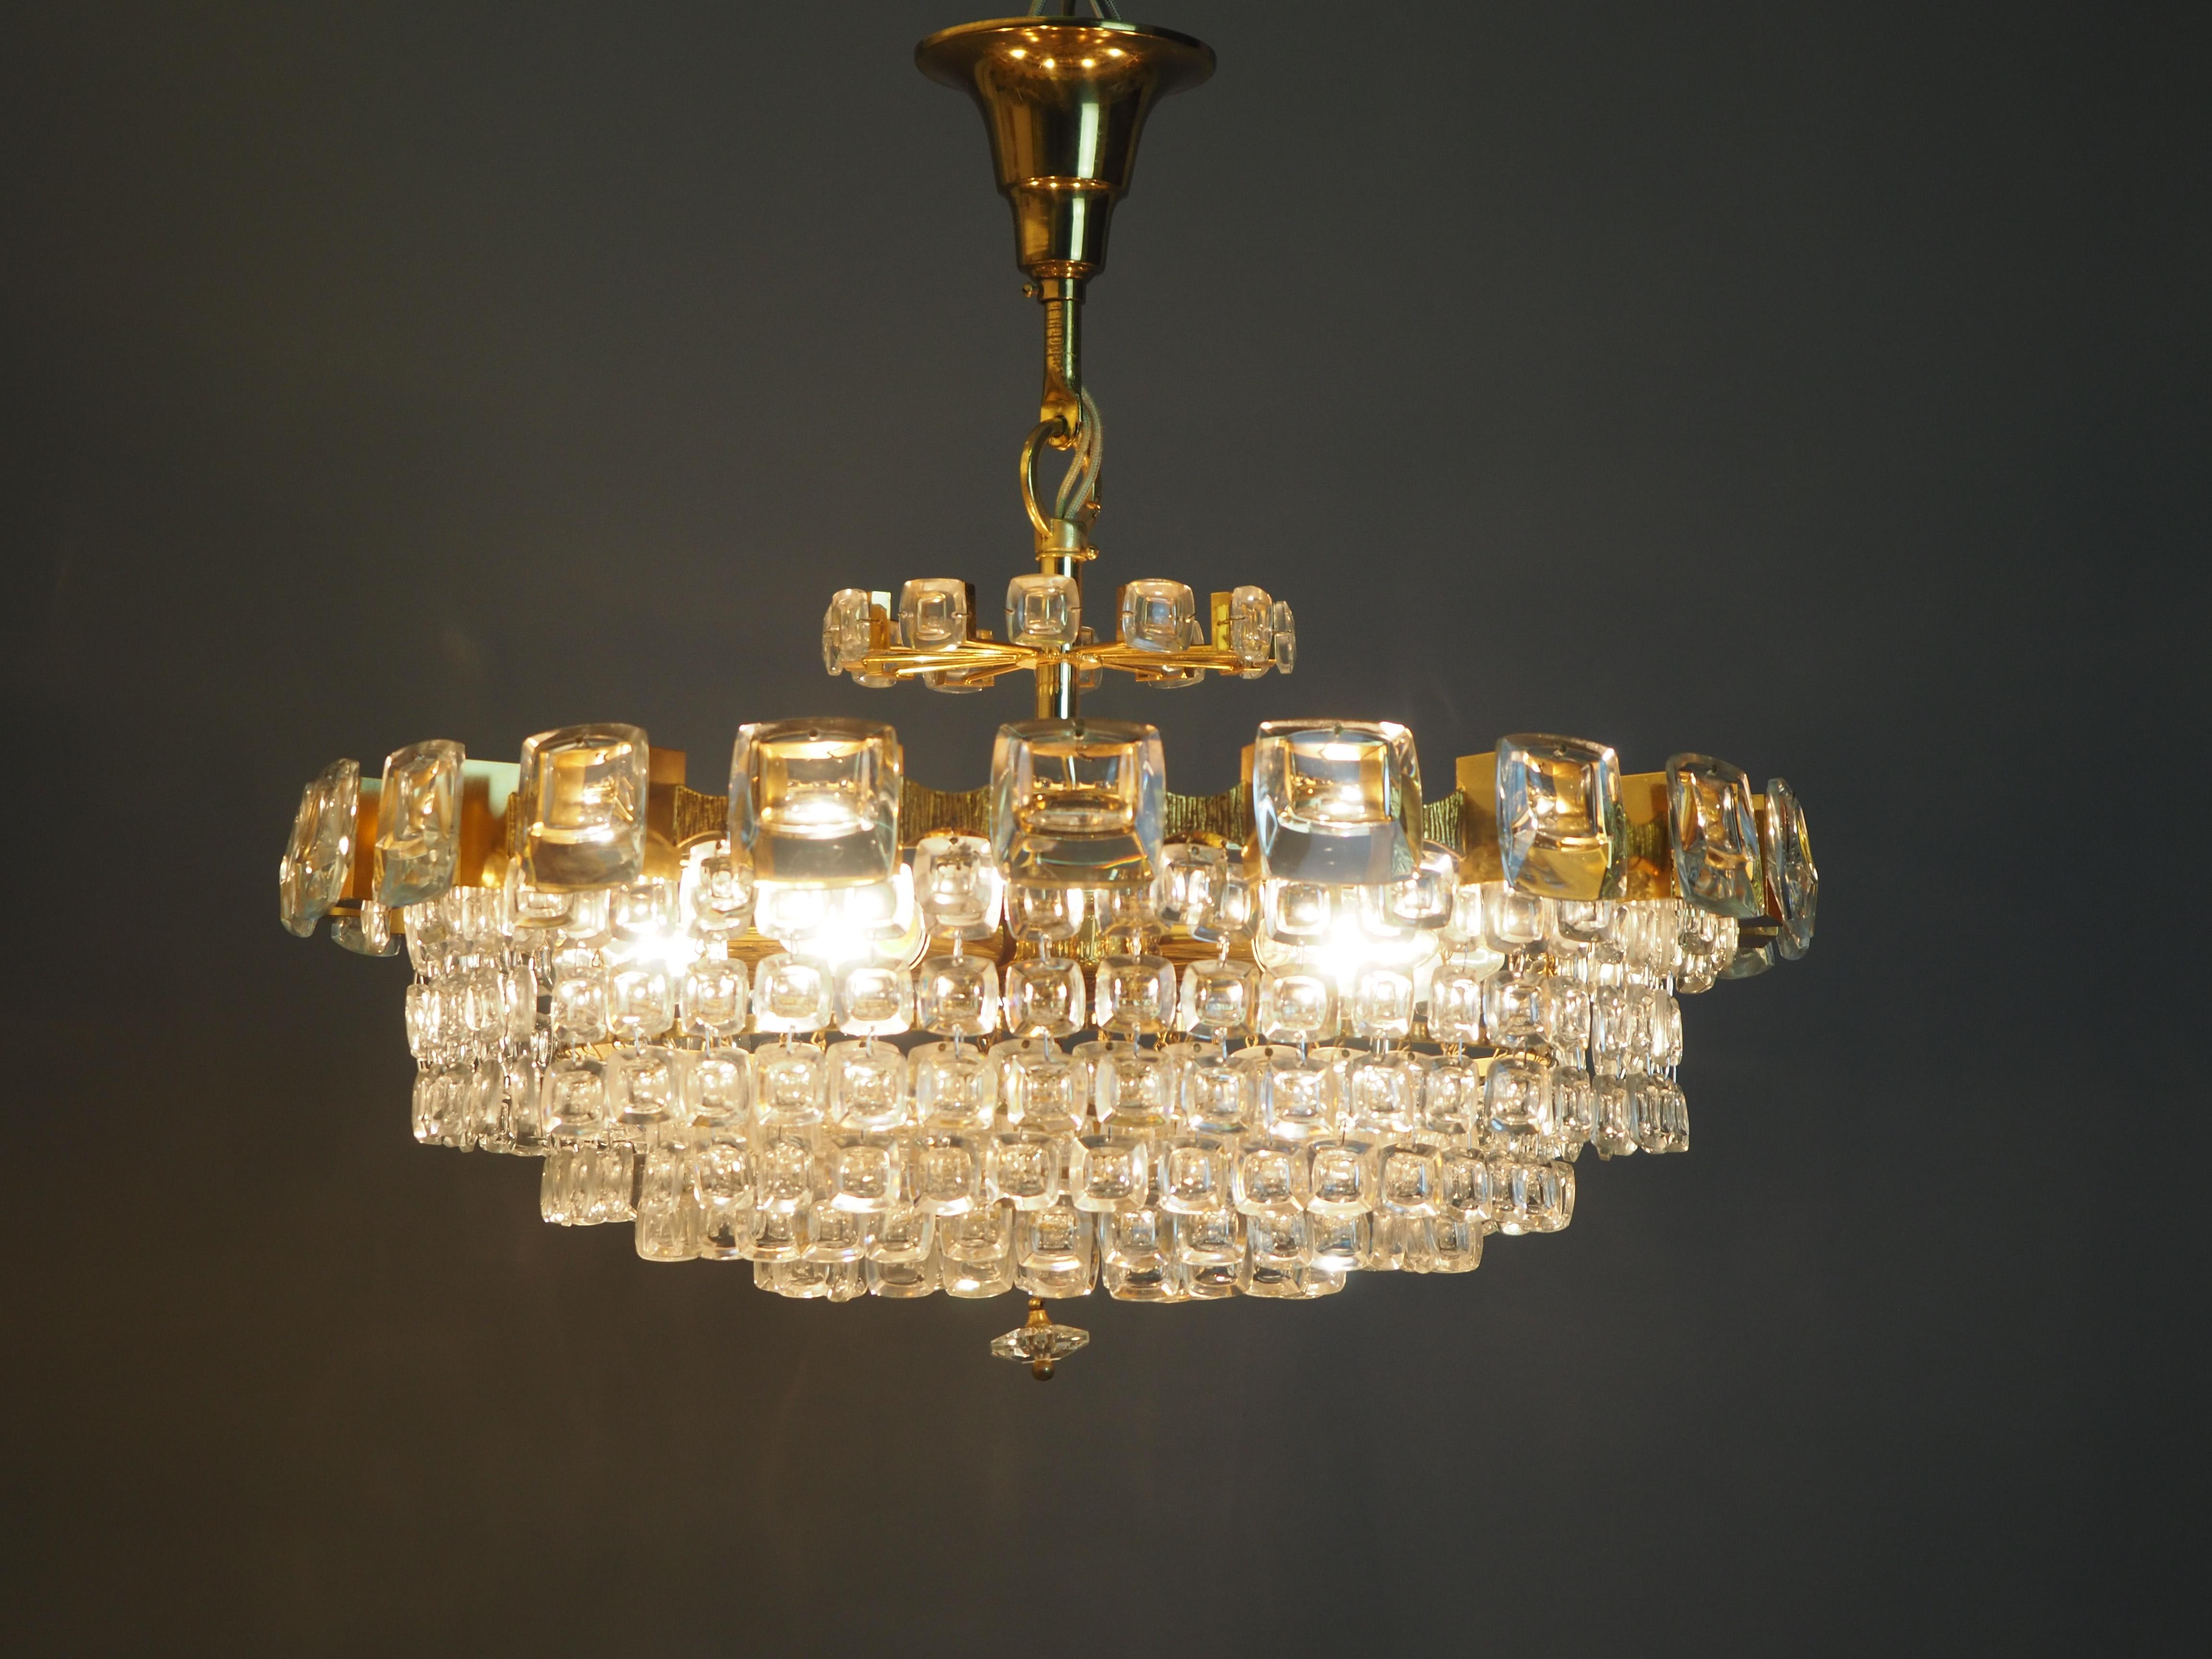 Wonderful midcentury, six-tiered gilt brass chandelier with square lens glasses.
A high quality light fixture in the Hollywood Regency style made by Palwa, Germany, circa 1970s.
The chandelier needs 5 x e14 (Edison) standard screw bulbs to